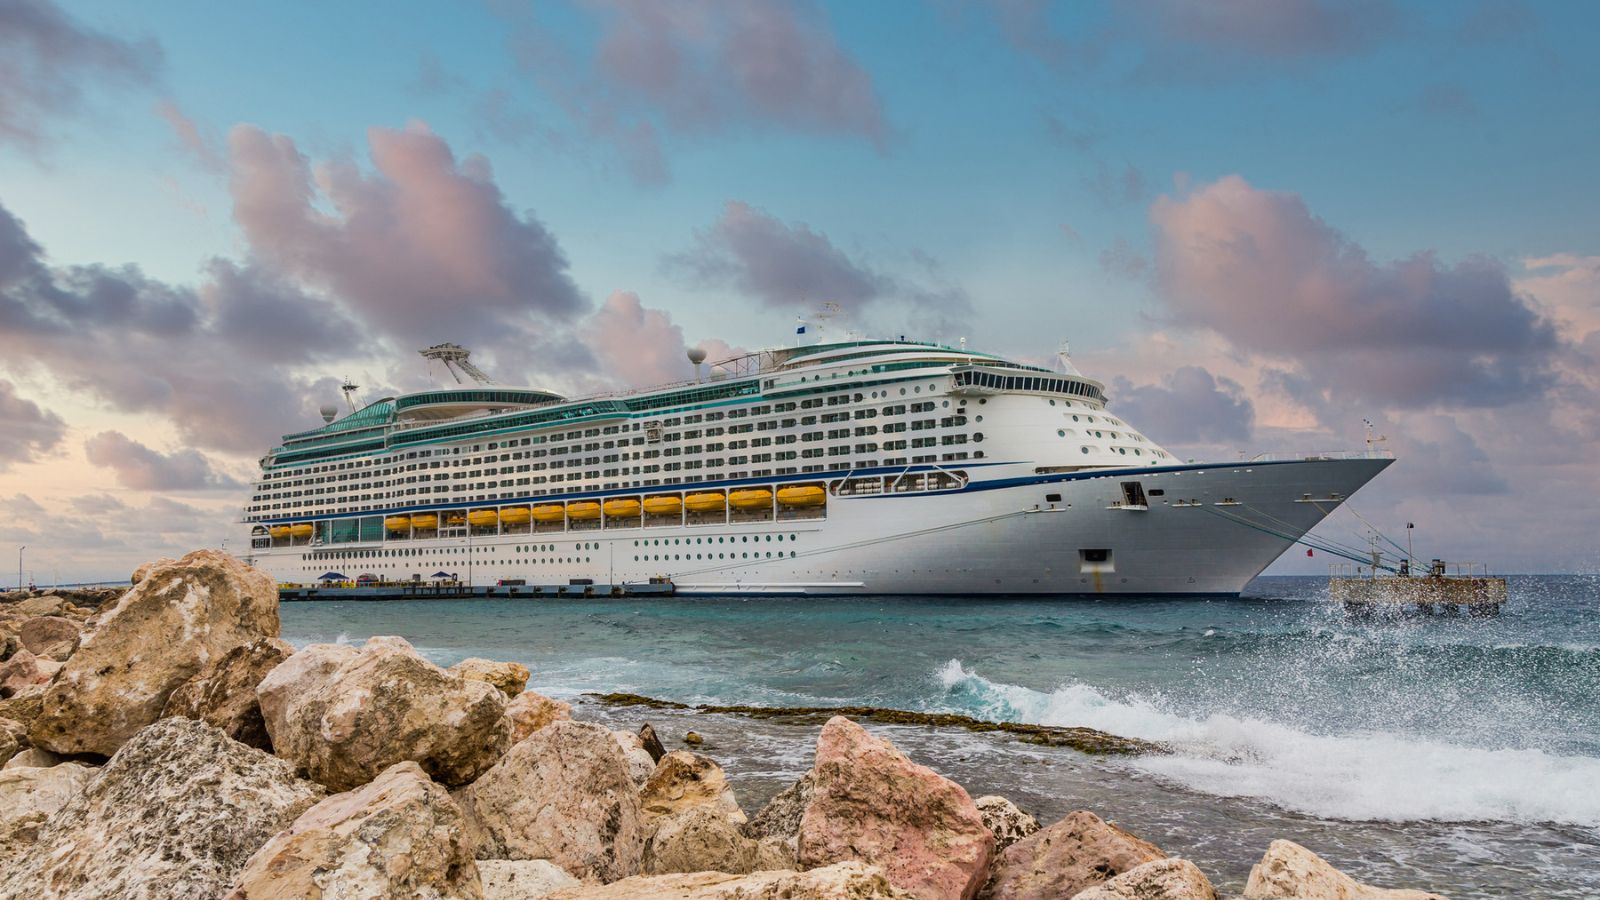 <p>People who go on regular cruises and use the same cruise line should look into available loyalty programs. Of course, the more points you accrue, the more valuable perks you’ll receive! Yet even entry-level tiers can grant you access to exclusive offers.</p><p>As you progress up the ladder, you can expect everything from complimentary food and drinks to on-board discounts. At the very top tiers, you can even get free cruises.</p><p><strong>MORE ARTICLES LIKE THIS COMING UP:</strong></p>